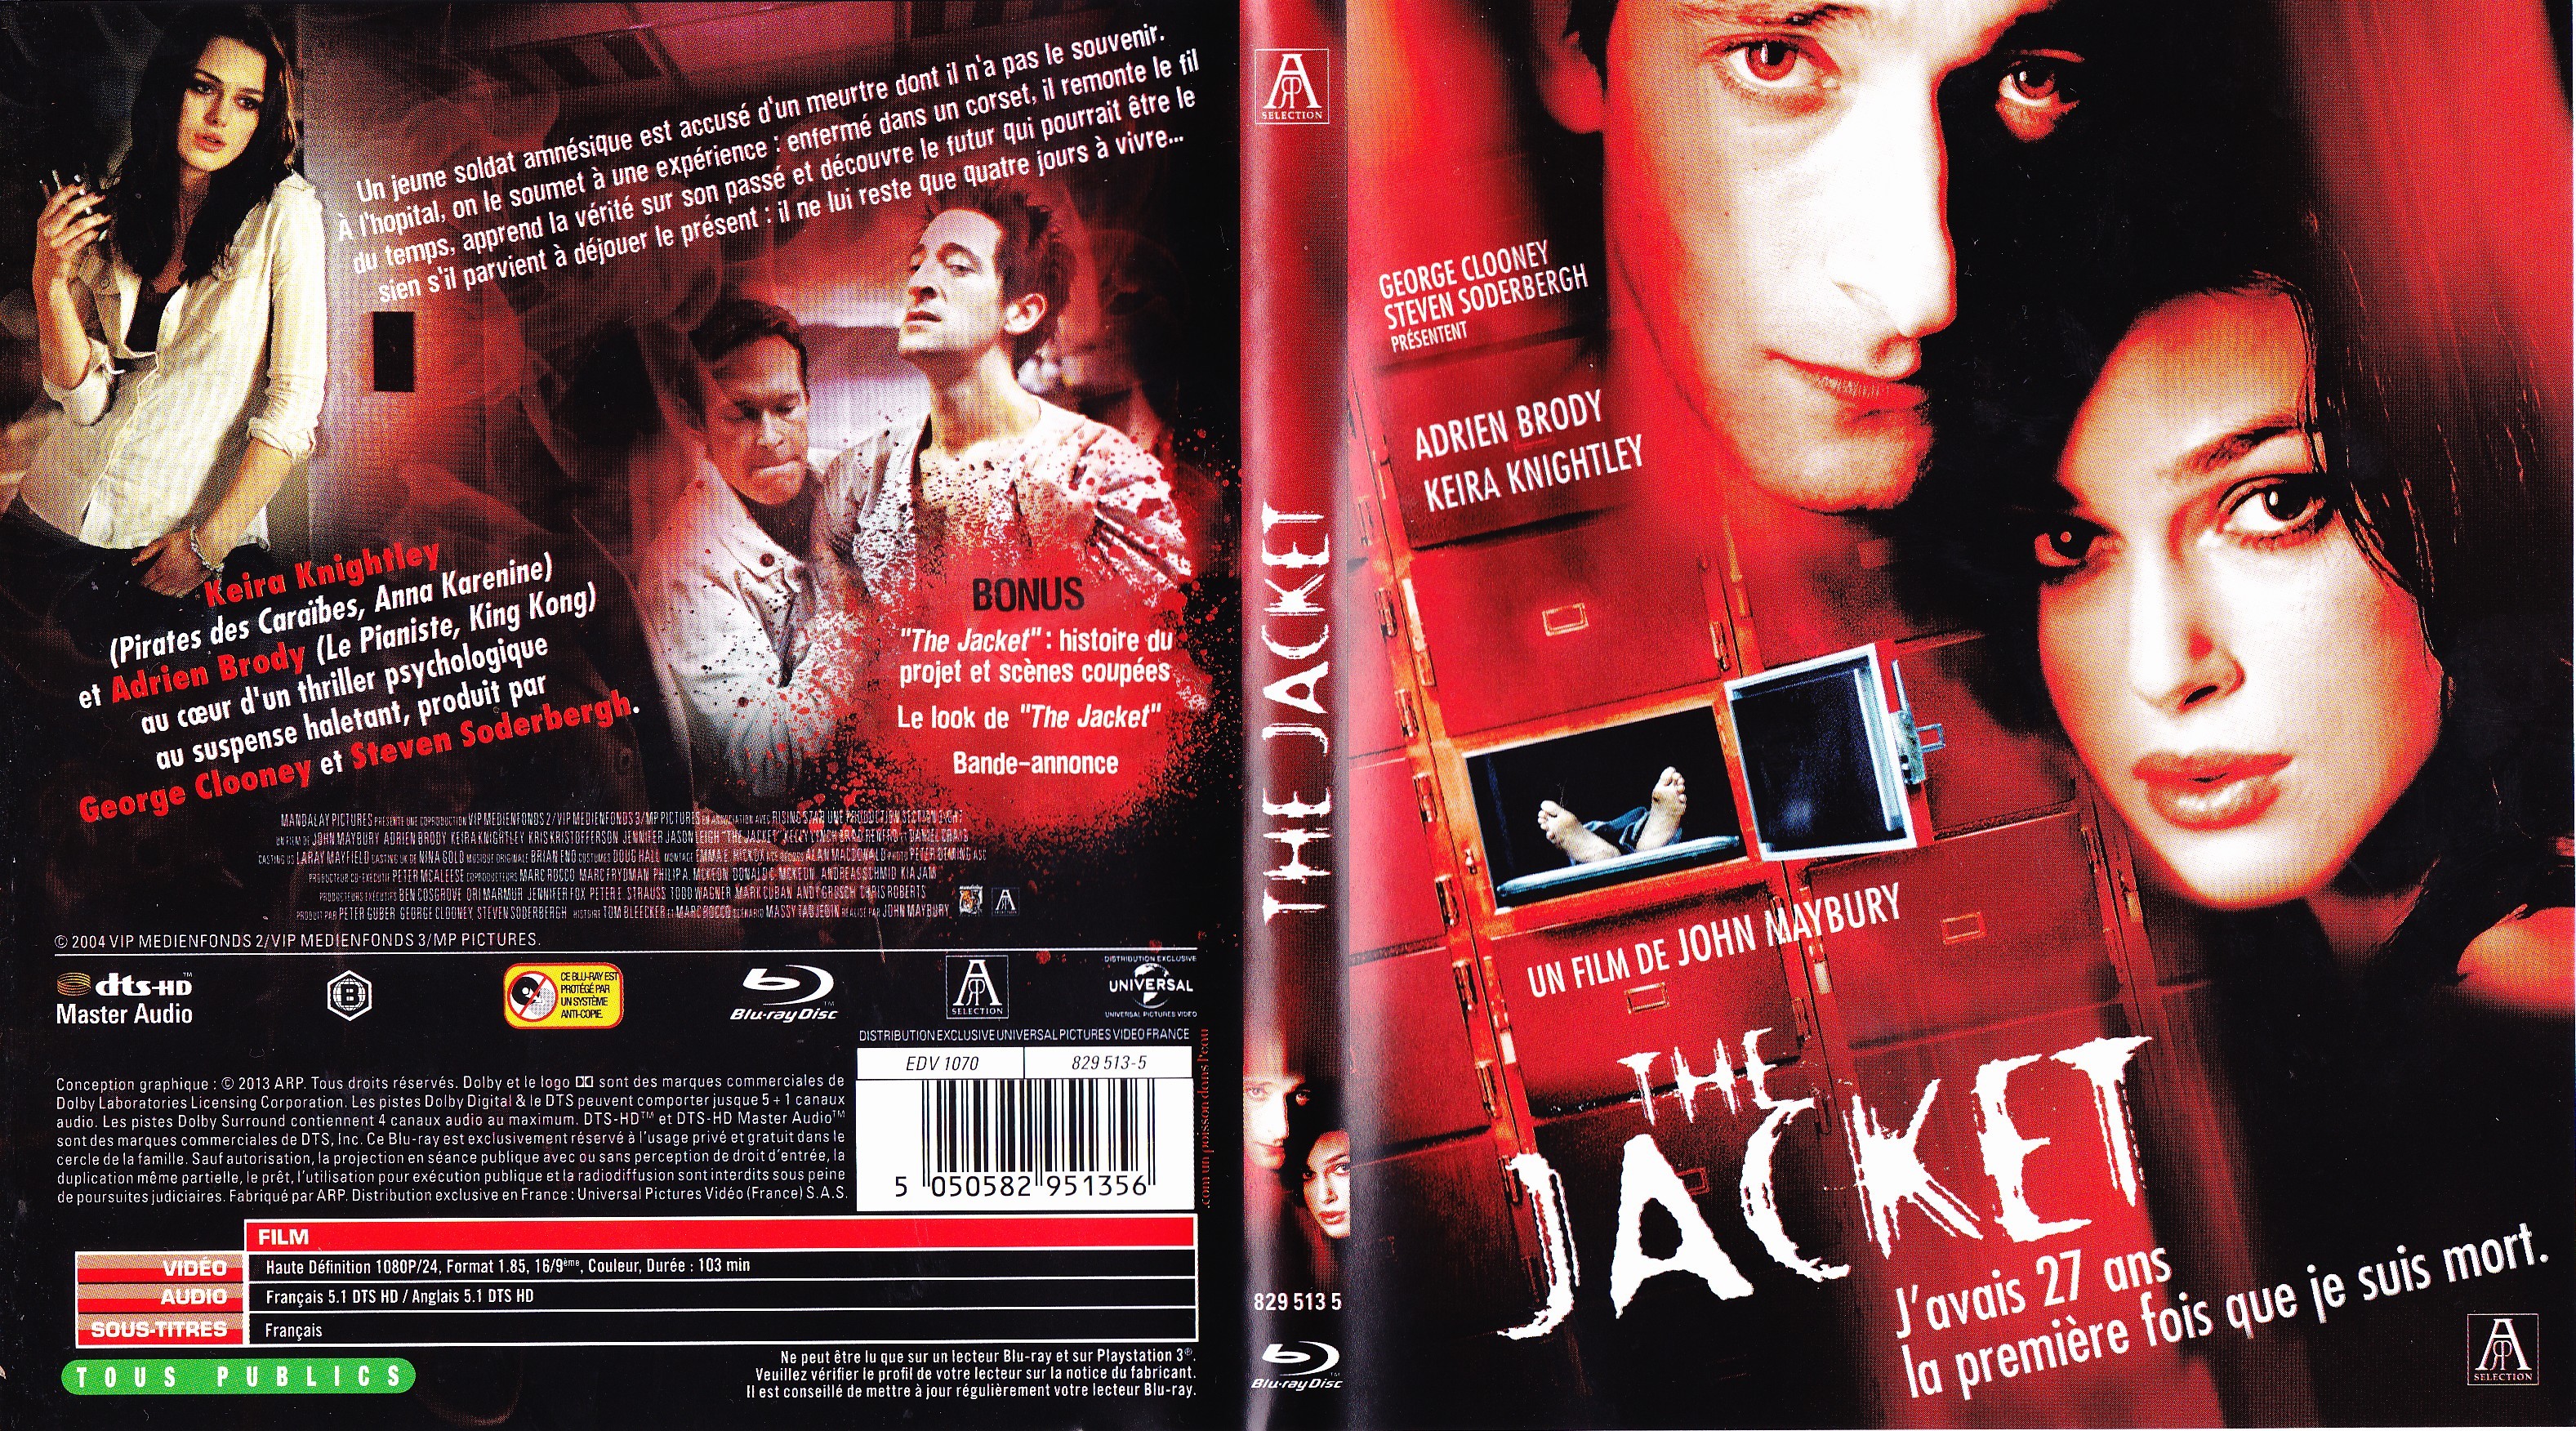 Jaquette DVD The jacket (BLU-RAY)